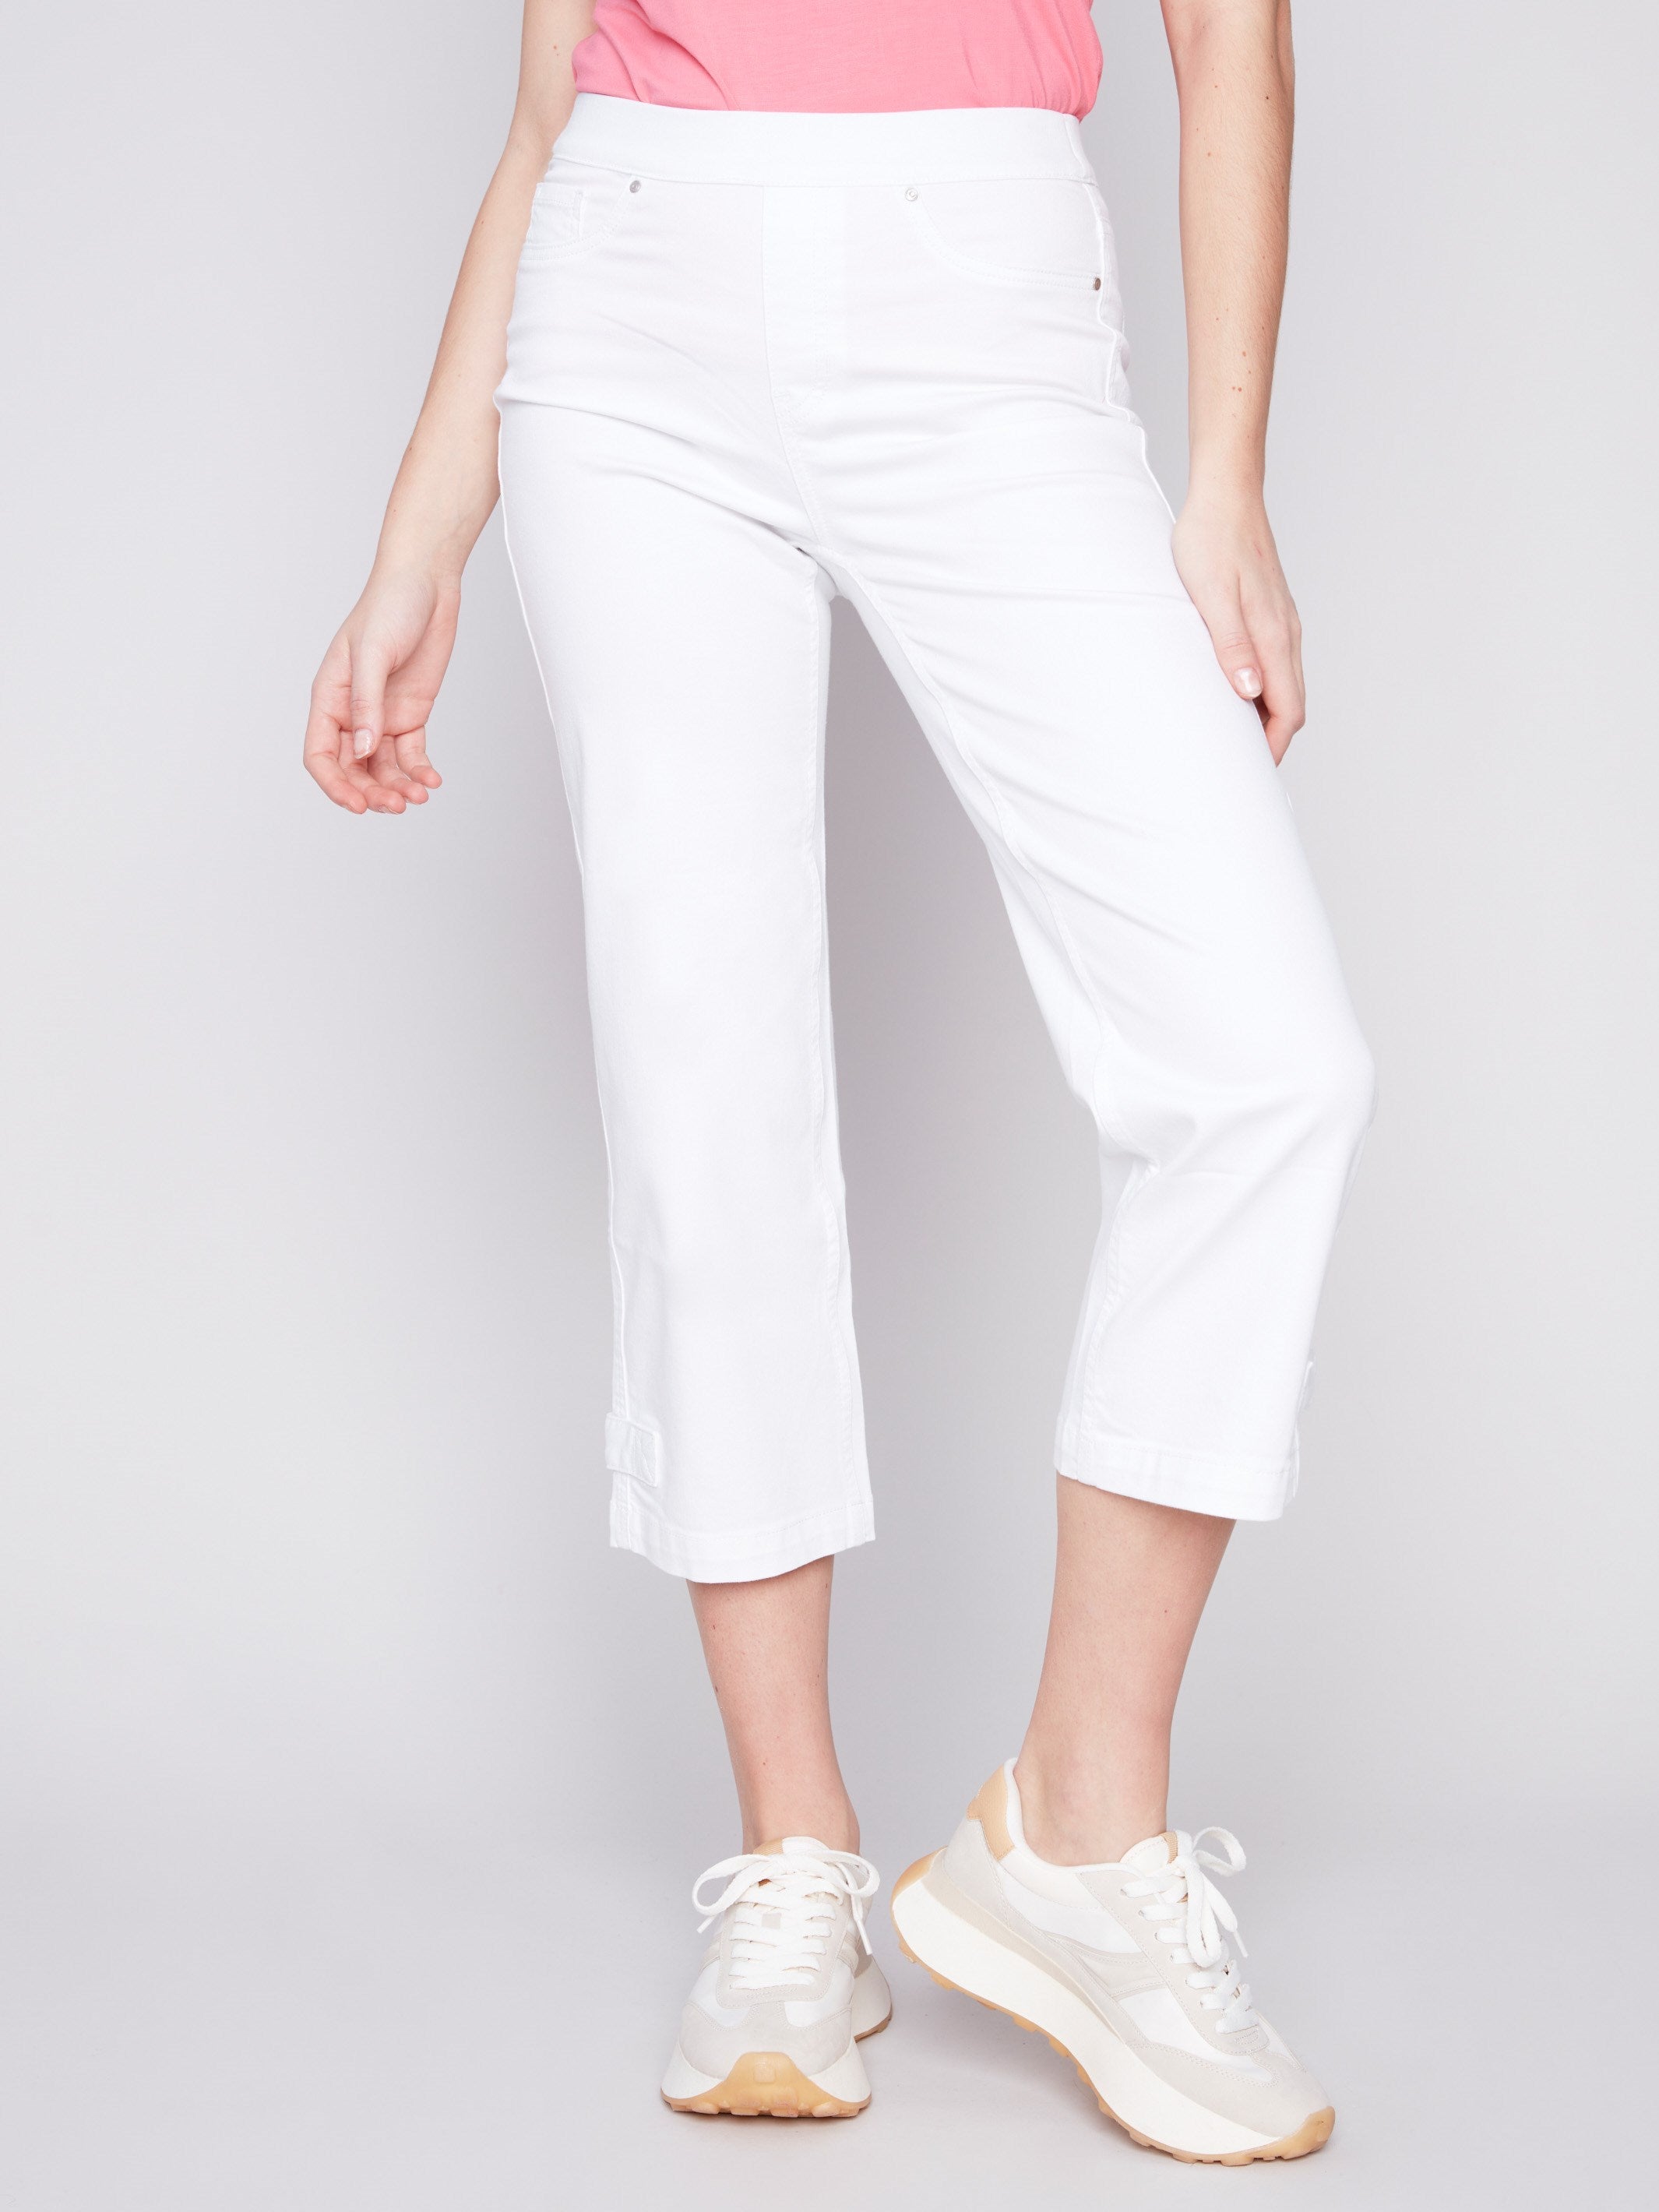 Charlie B Cropped Pull-On Twill Pants with Hem Tab - White - Image 2